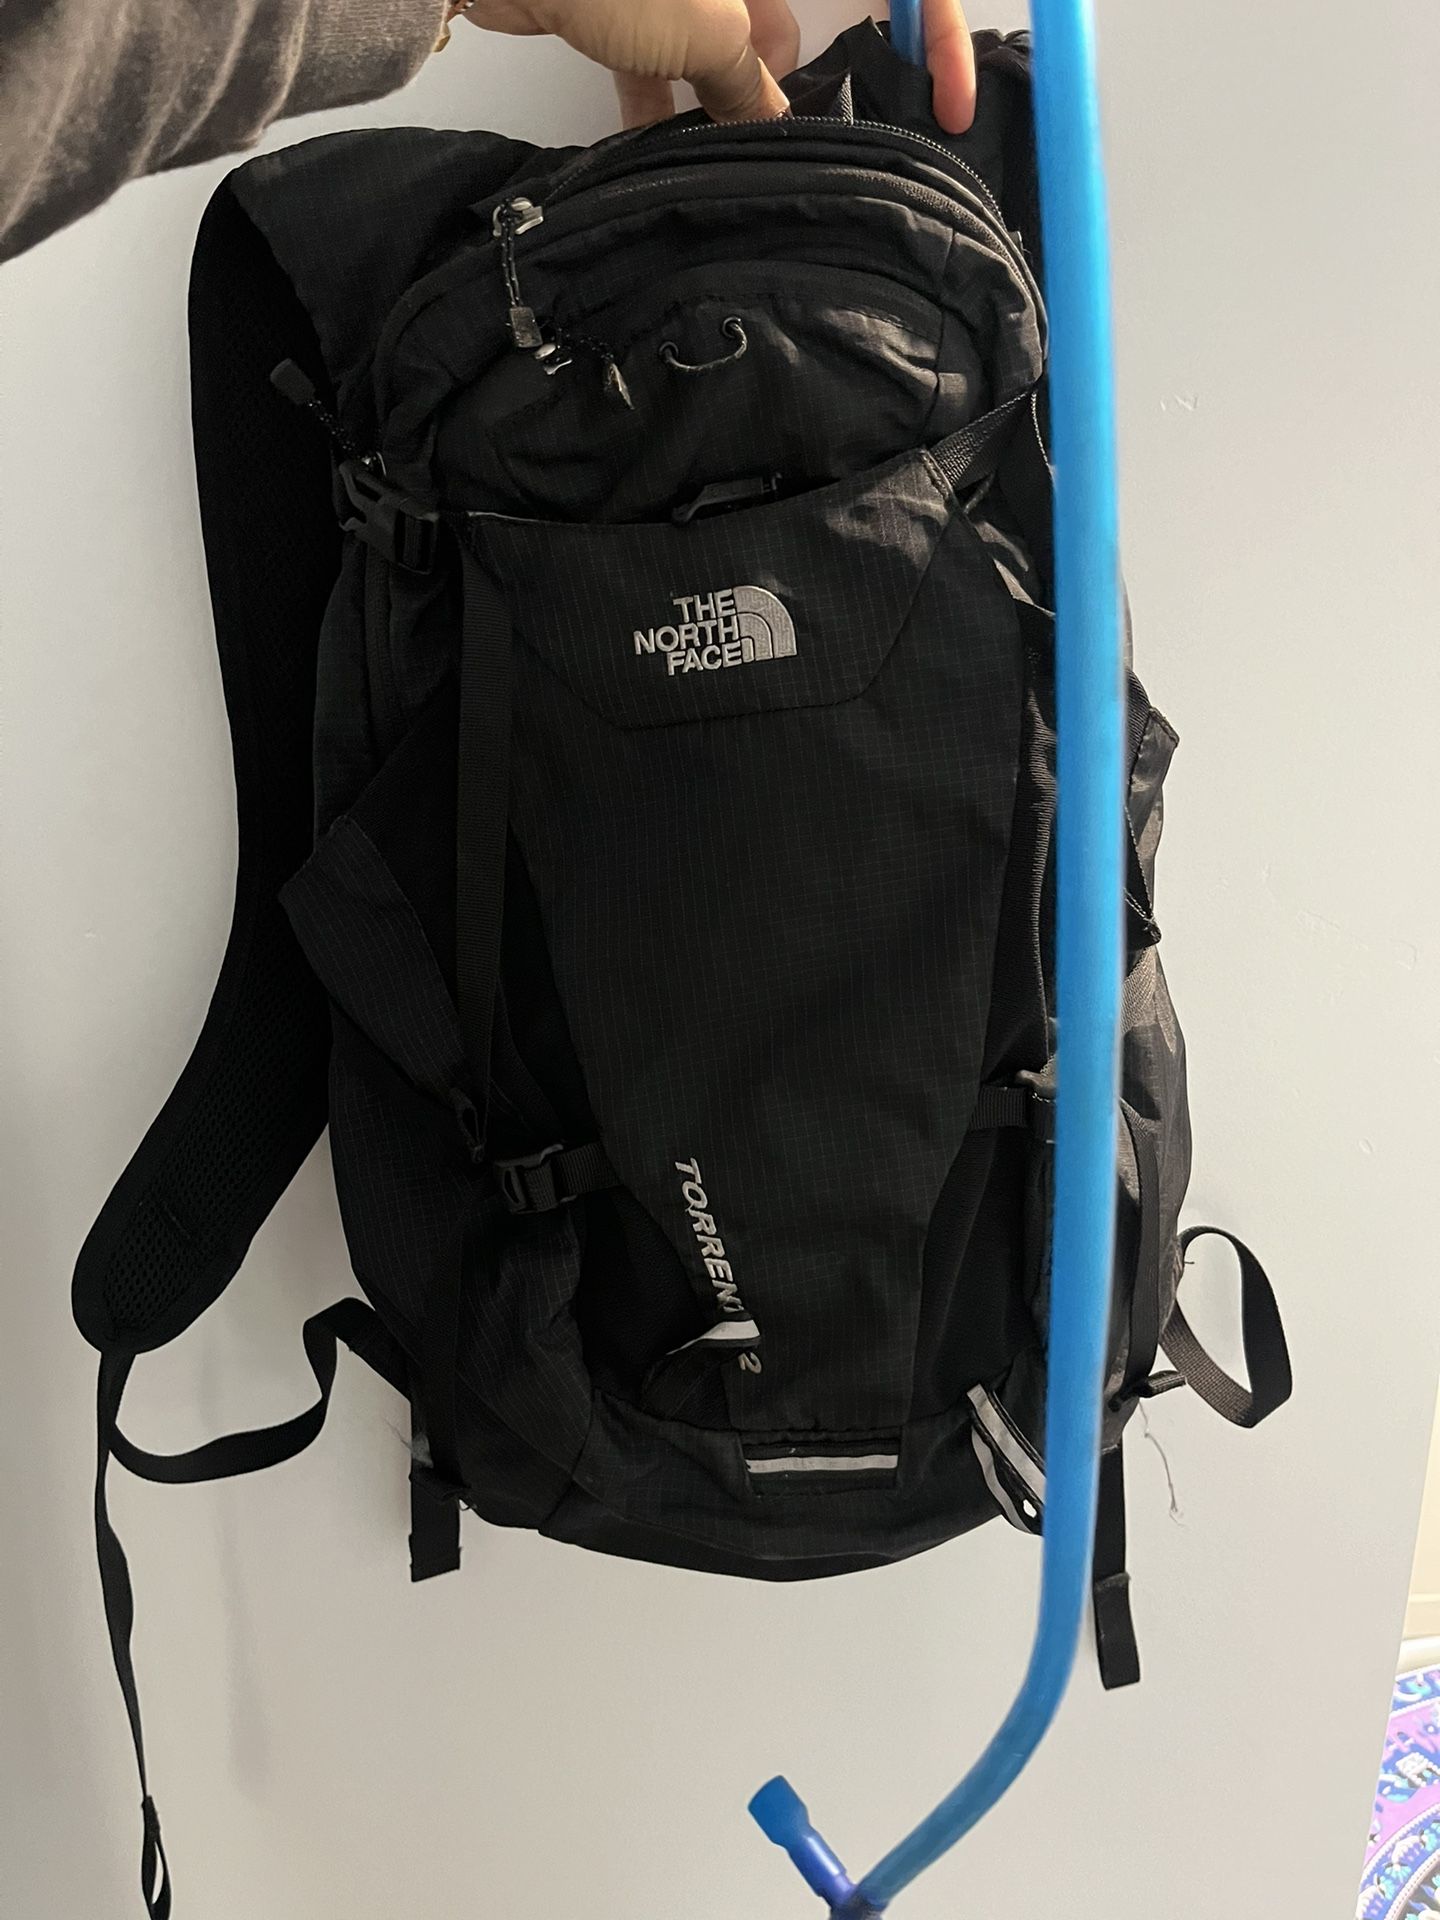 Backpack For Running (the North Face)